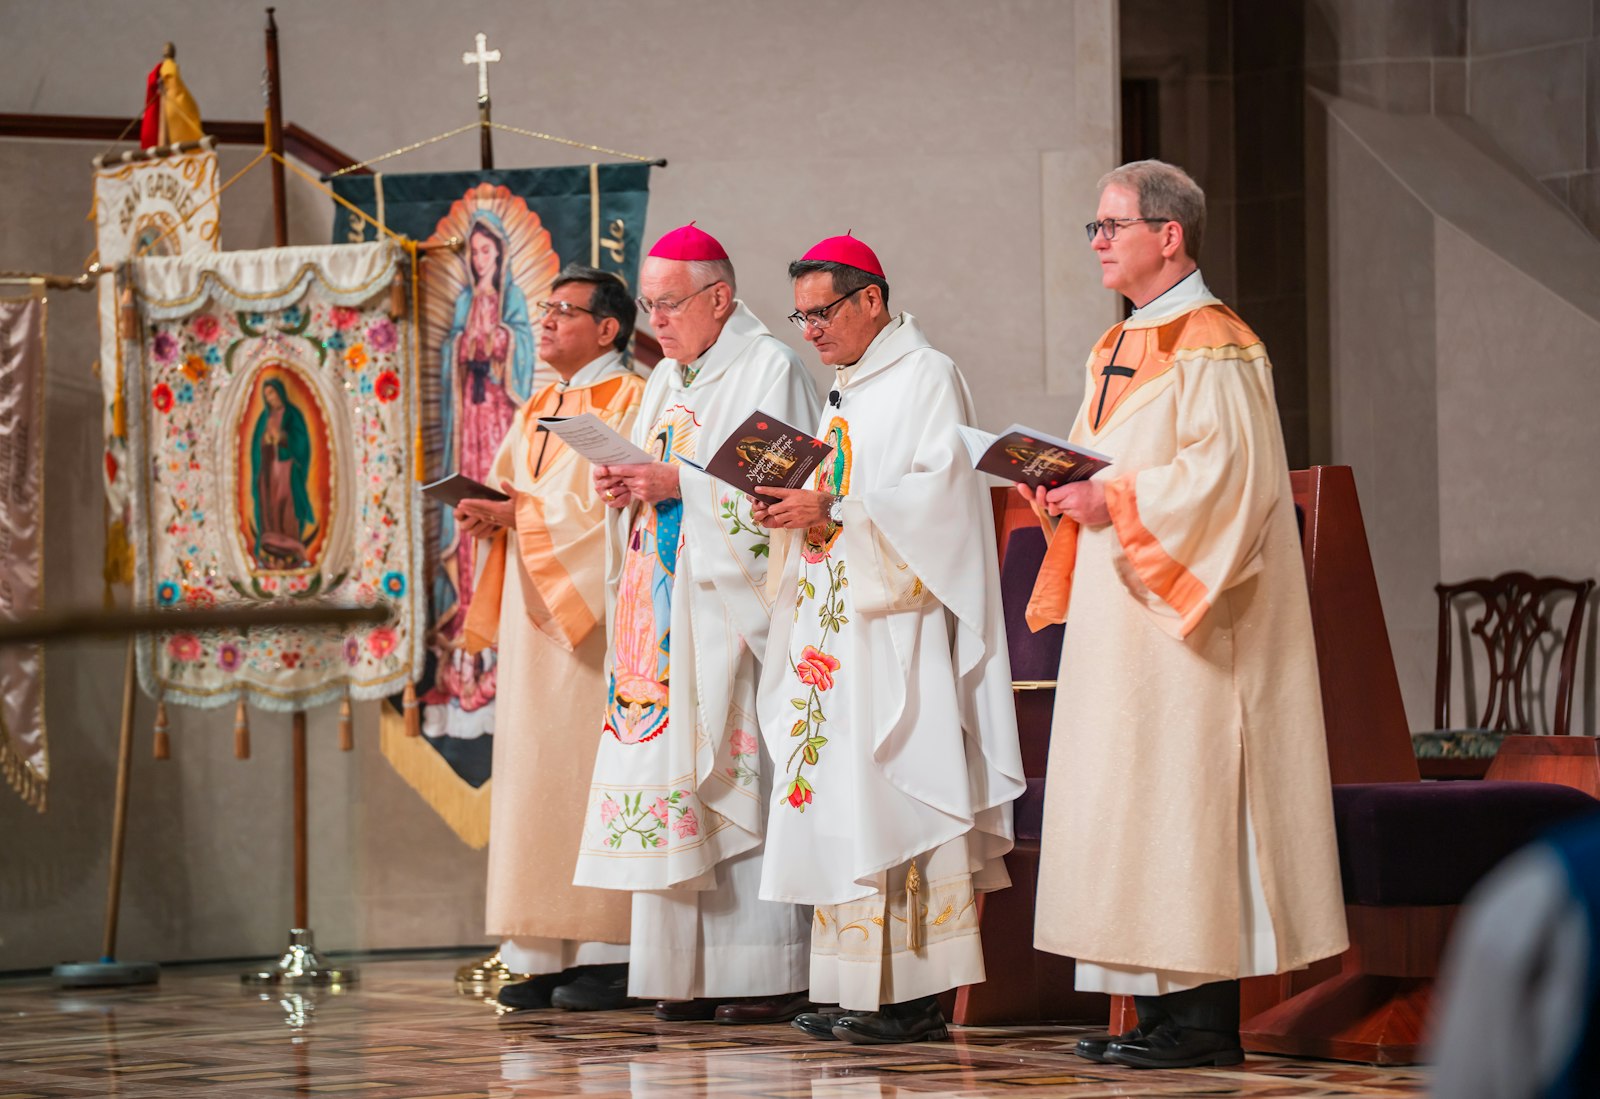 During Mass in celebration of Our Lady of Guadalupe on the feast of St. Juan Diego, Dec. 9, Bishop Arturo Cepeda made clear that the example and message given by Our Lady in 1531 are still true today in 2022.